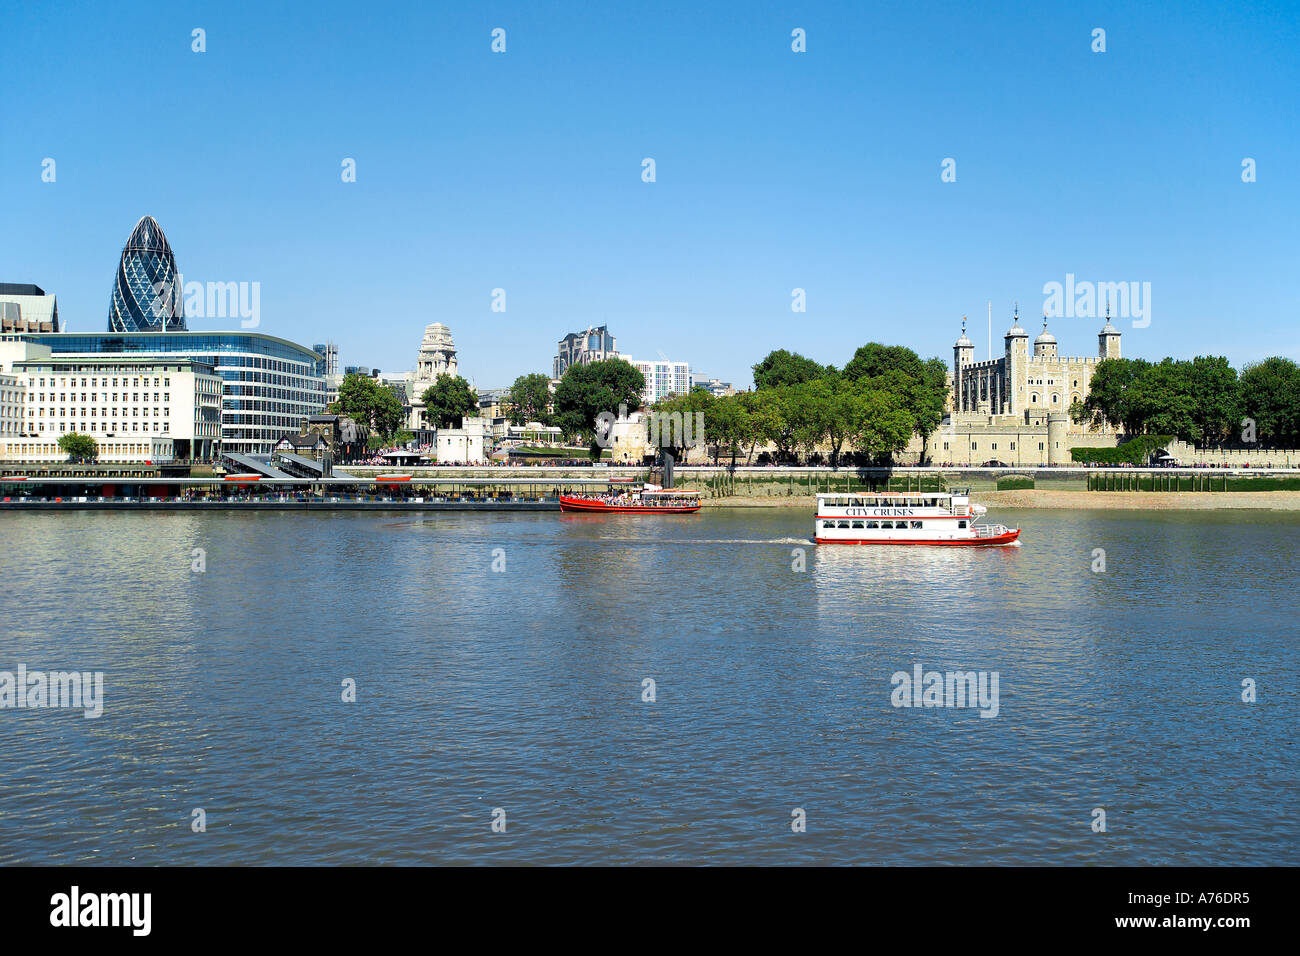 Wide view of the Thames north bank including the Swiss Re building and the Tower of London with a tourist boat on the river. Stock Photo